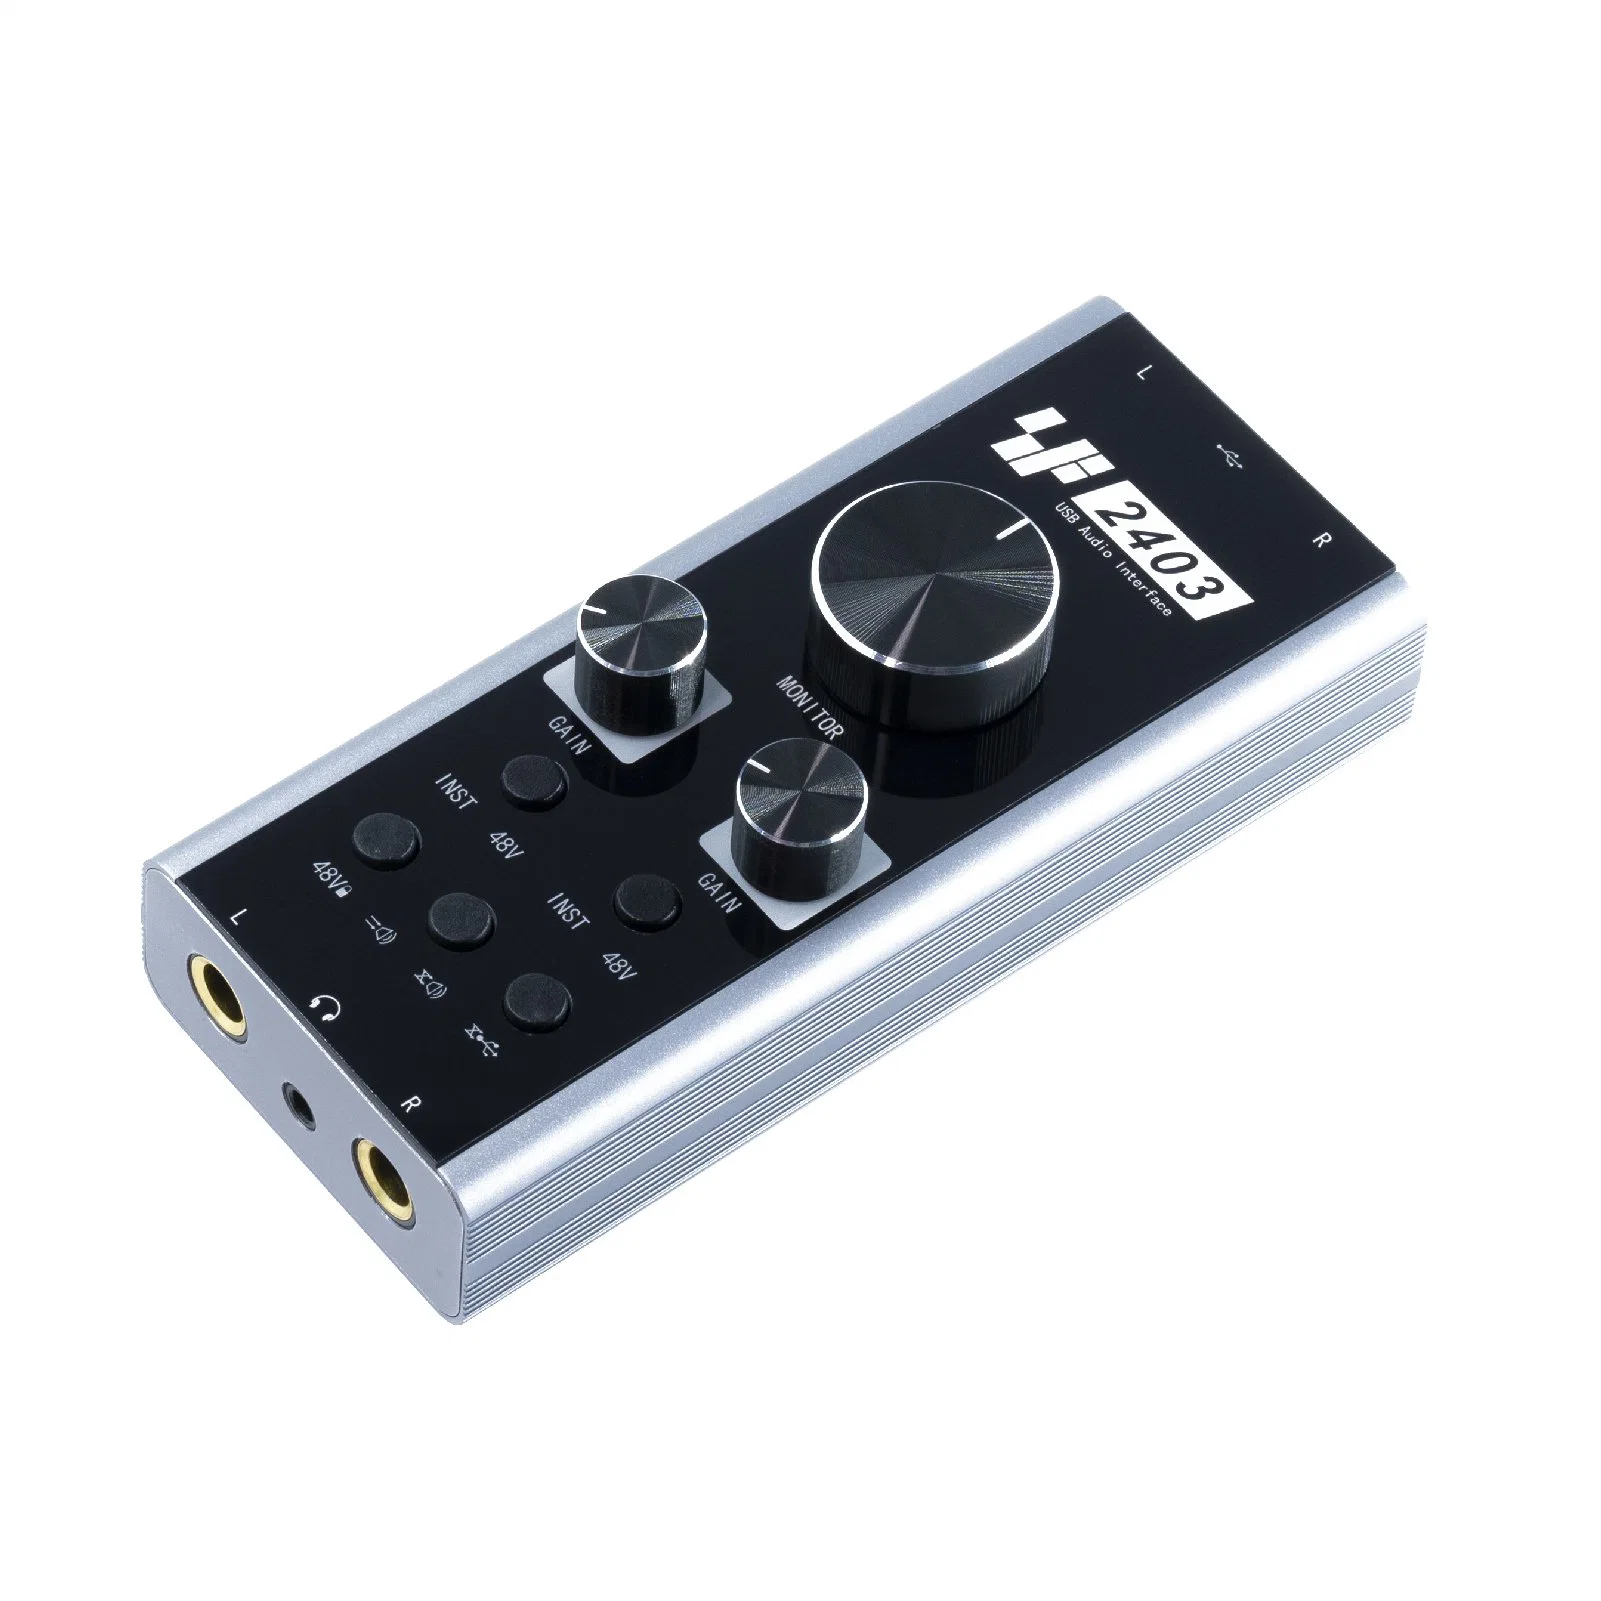 Mini Audio Interface 2 in 2 out with 24 Bit 192kHz High-Quality Recording Super Clear and Convenient for Podcast Livestreaming Editing Ready to Go